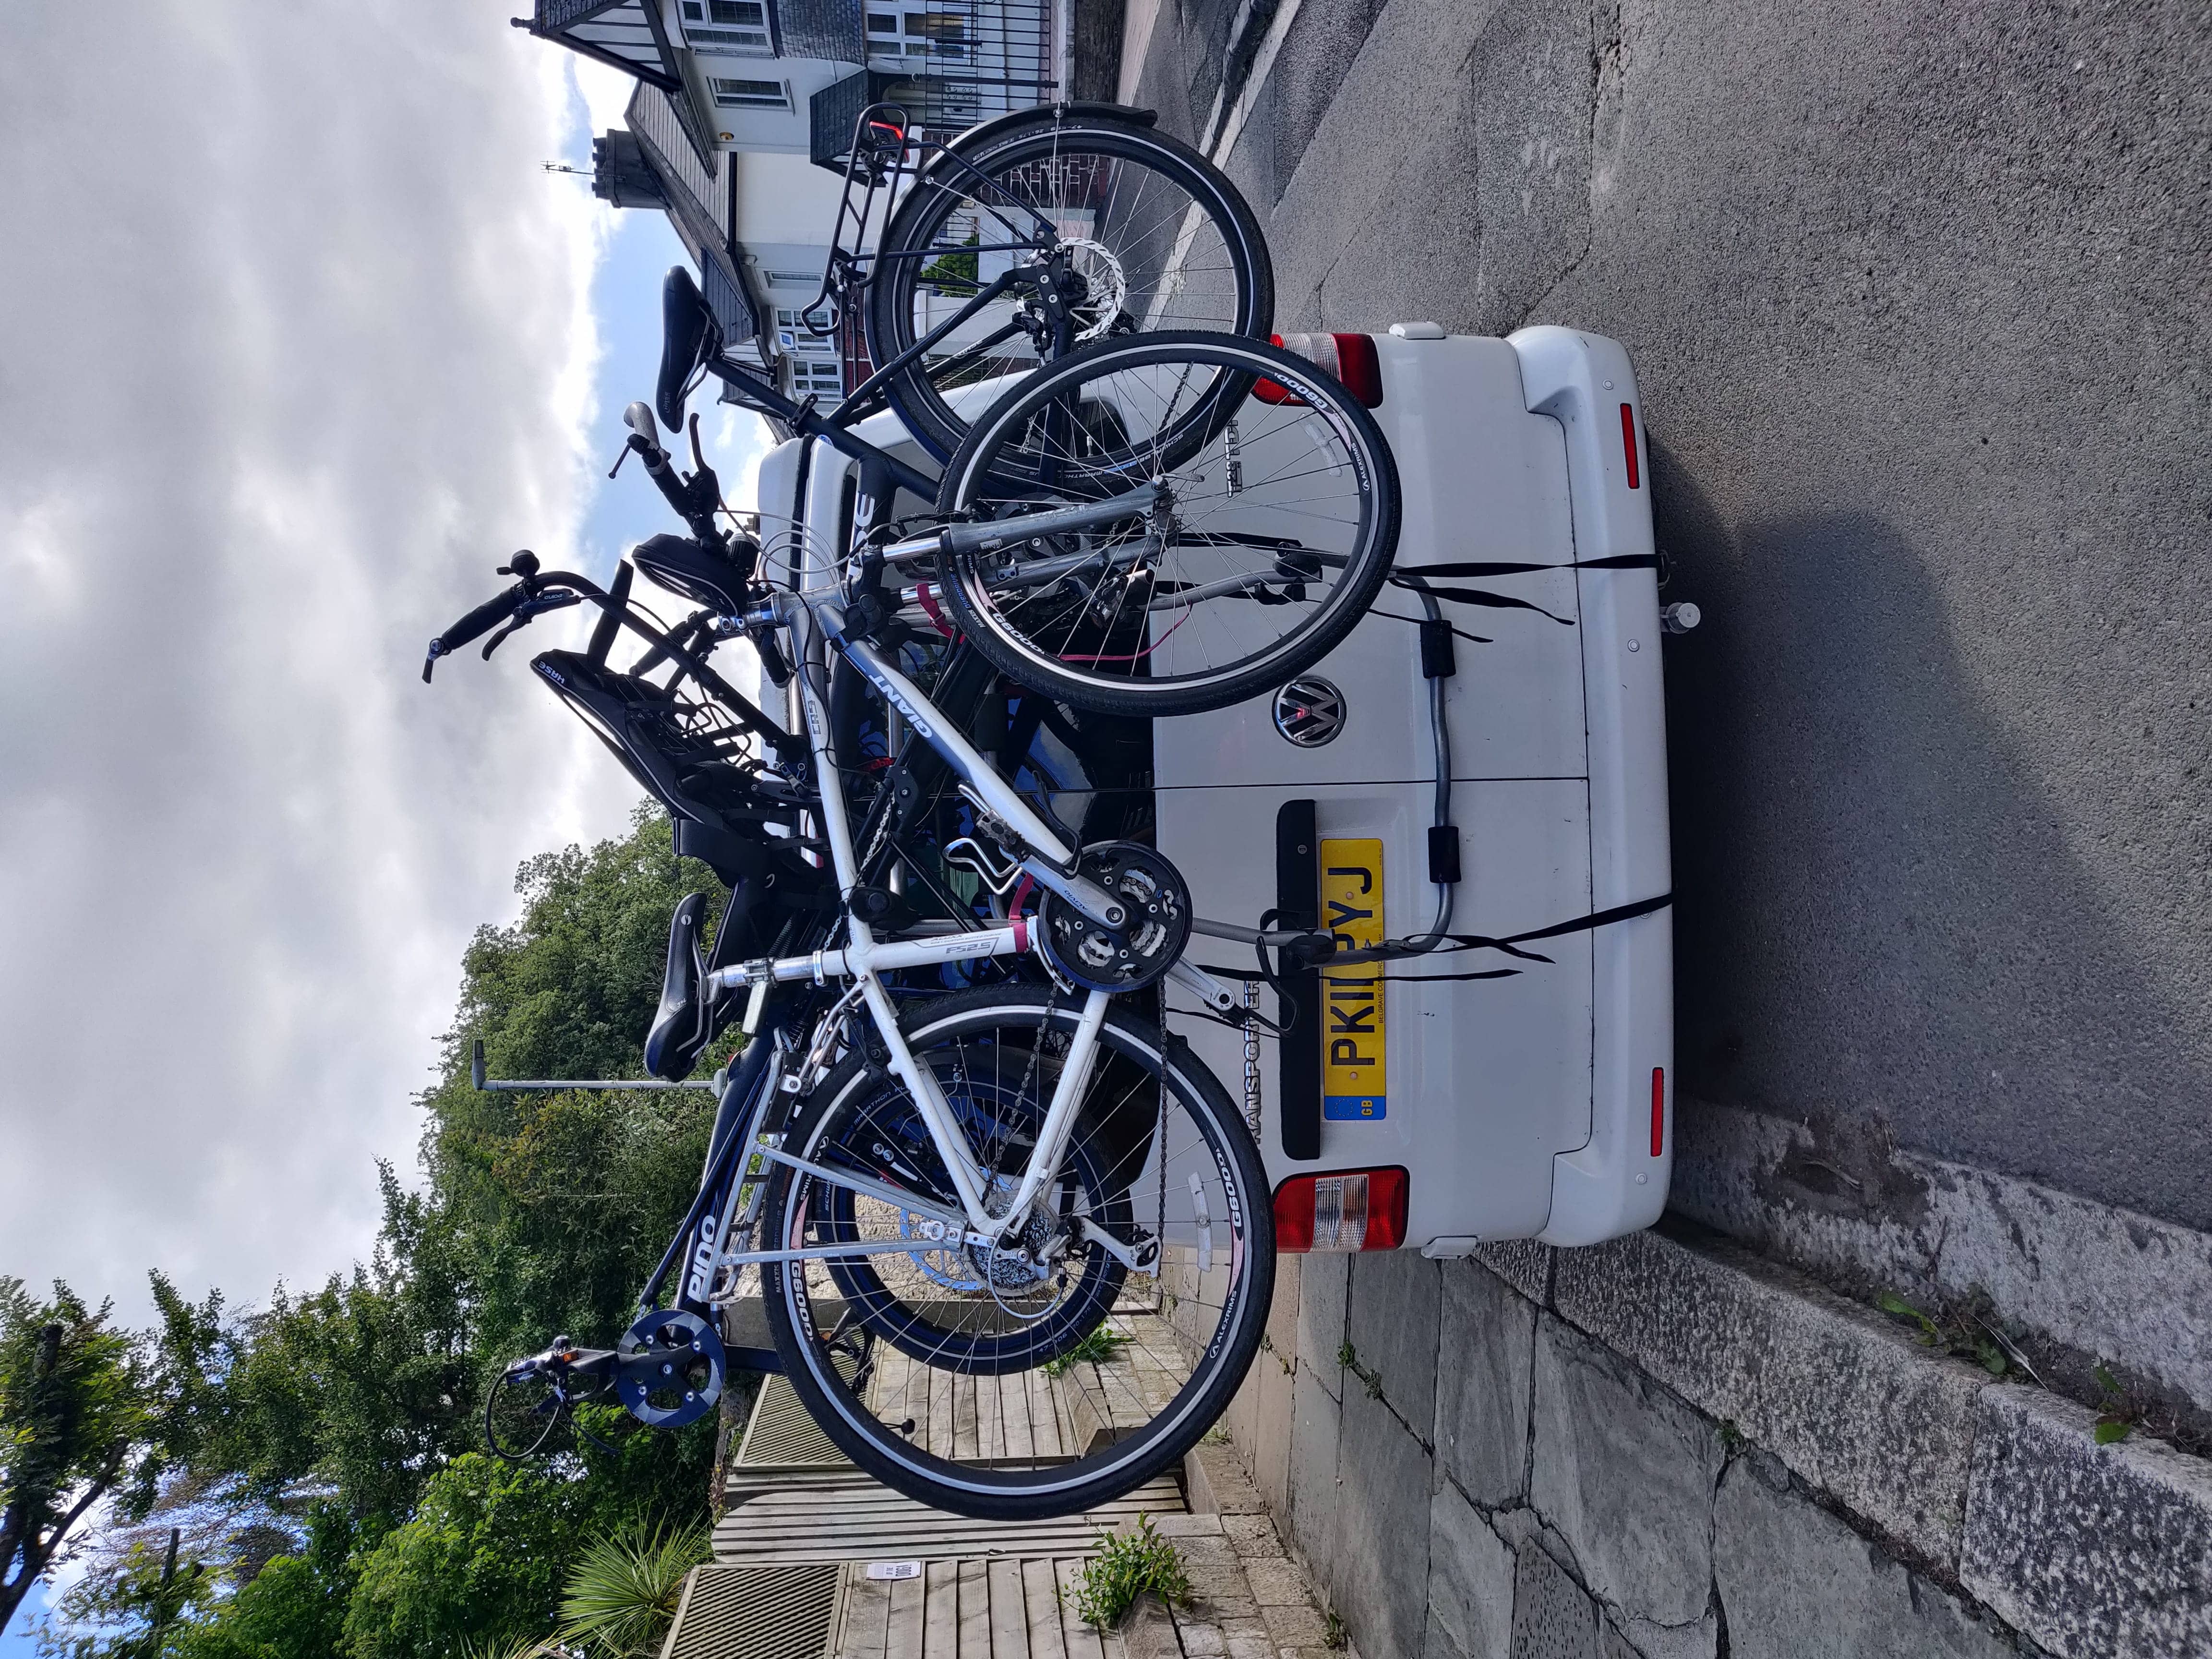 The Pino and Hannah’s bike loaded on the back of the van, it does overhang quite a lot!